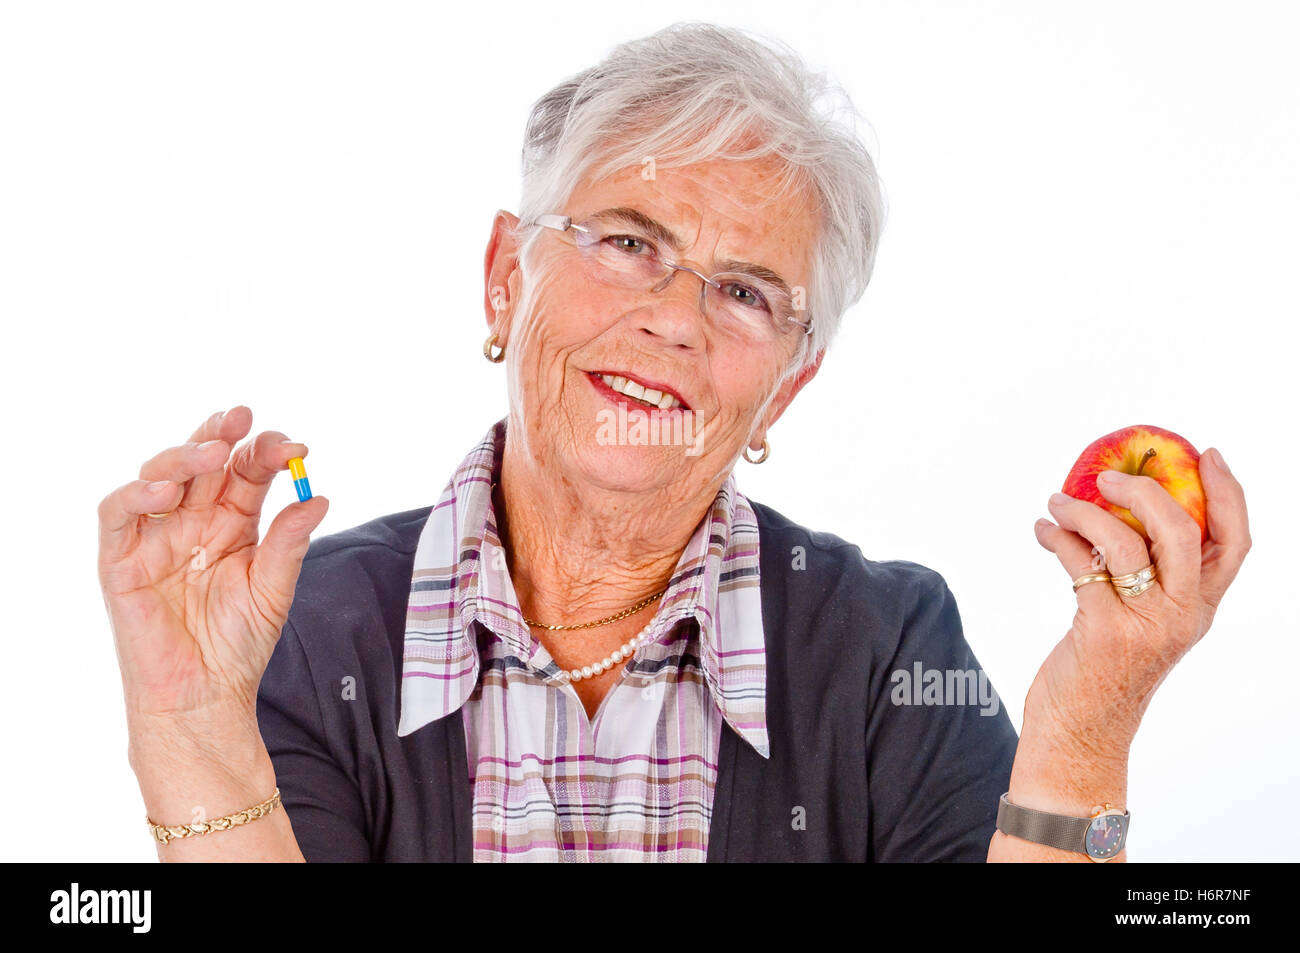 old people Stock Photo